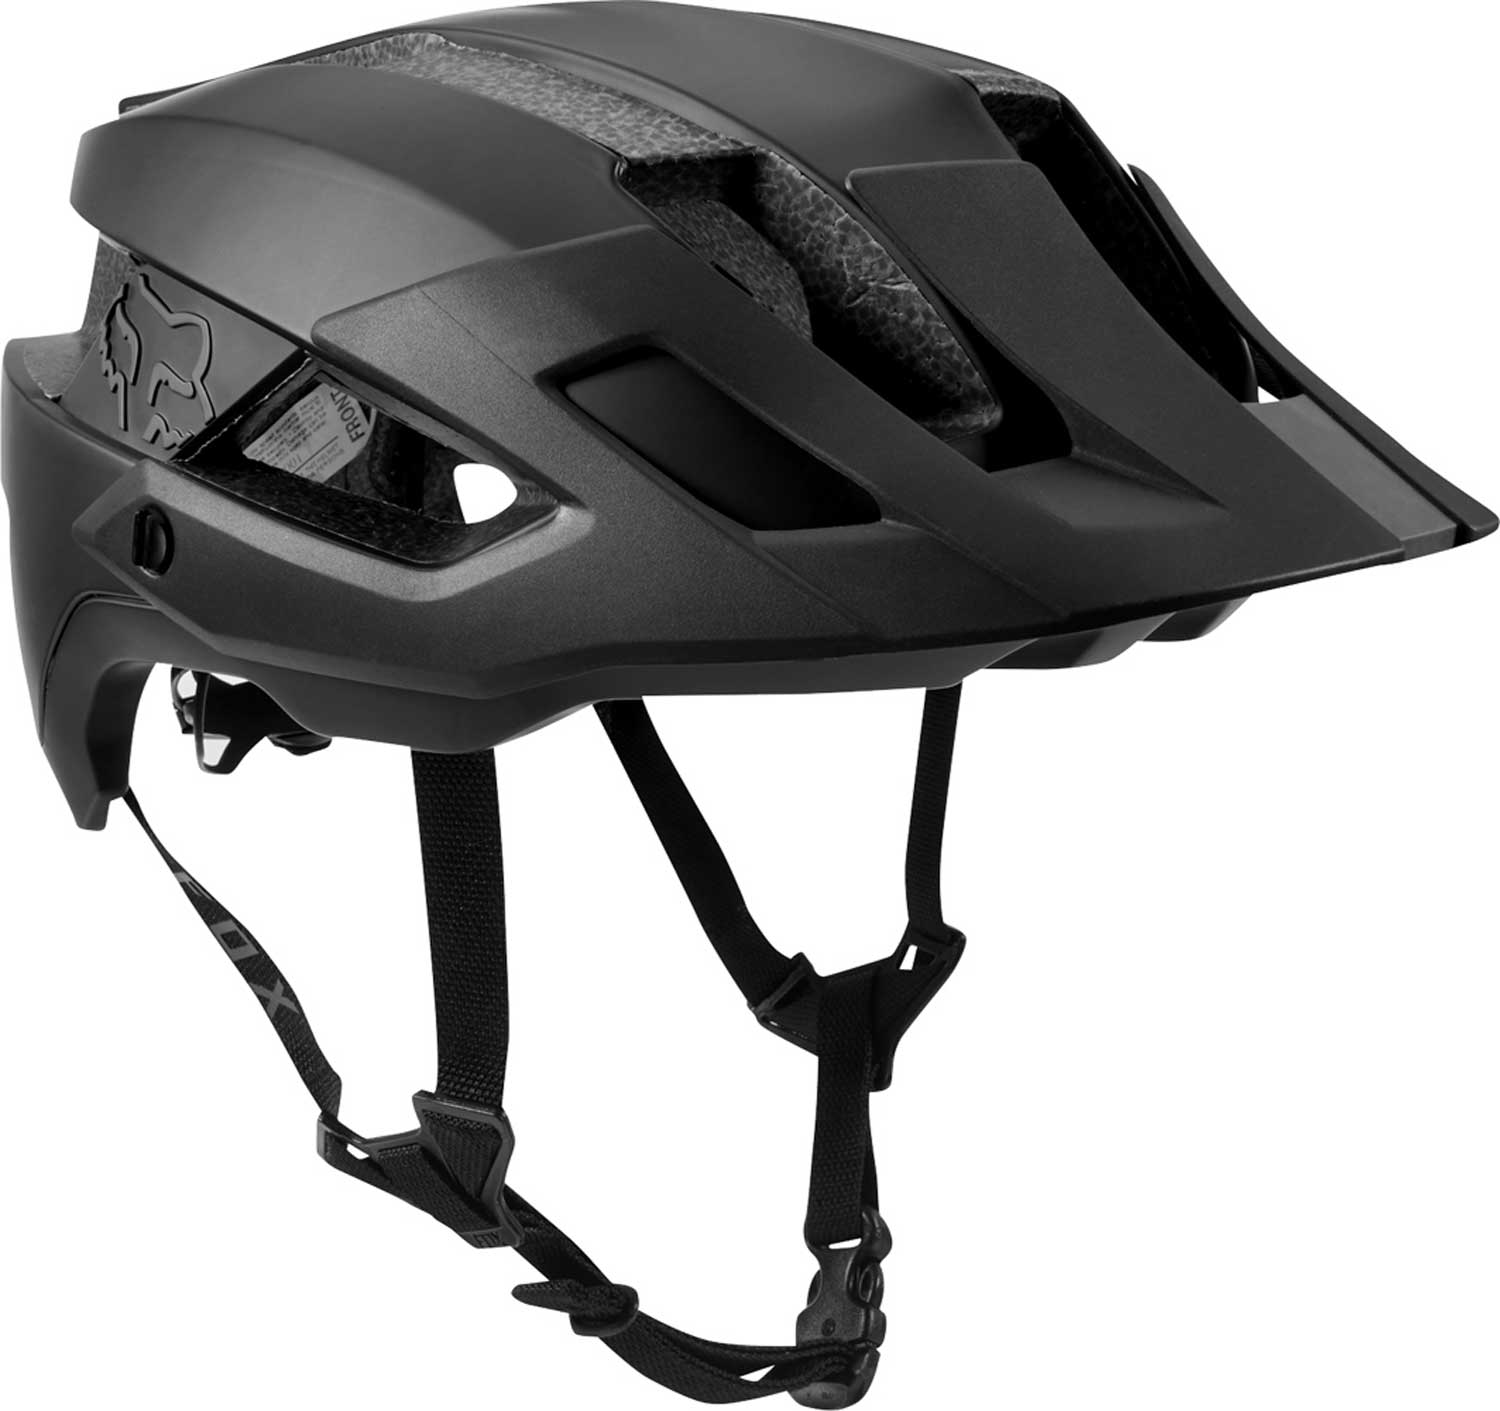 All mountain cycling helmet